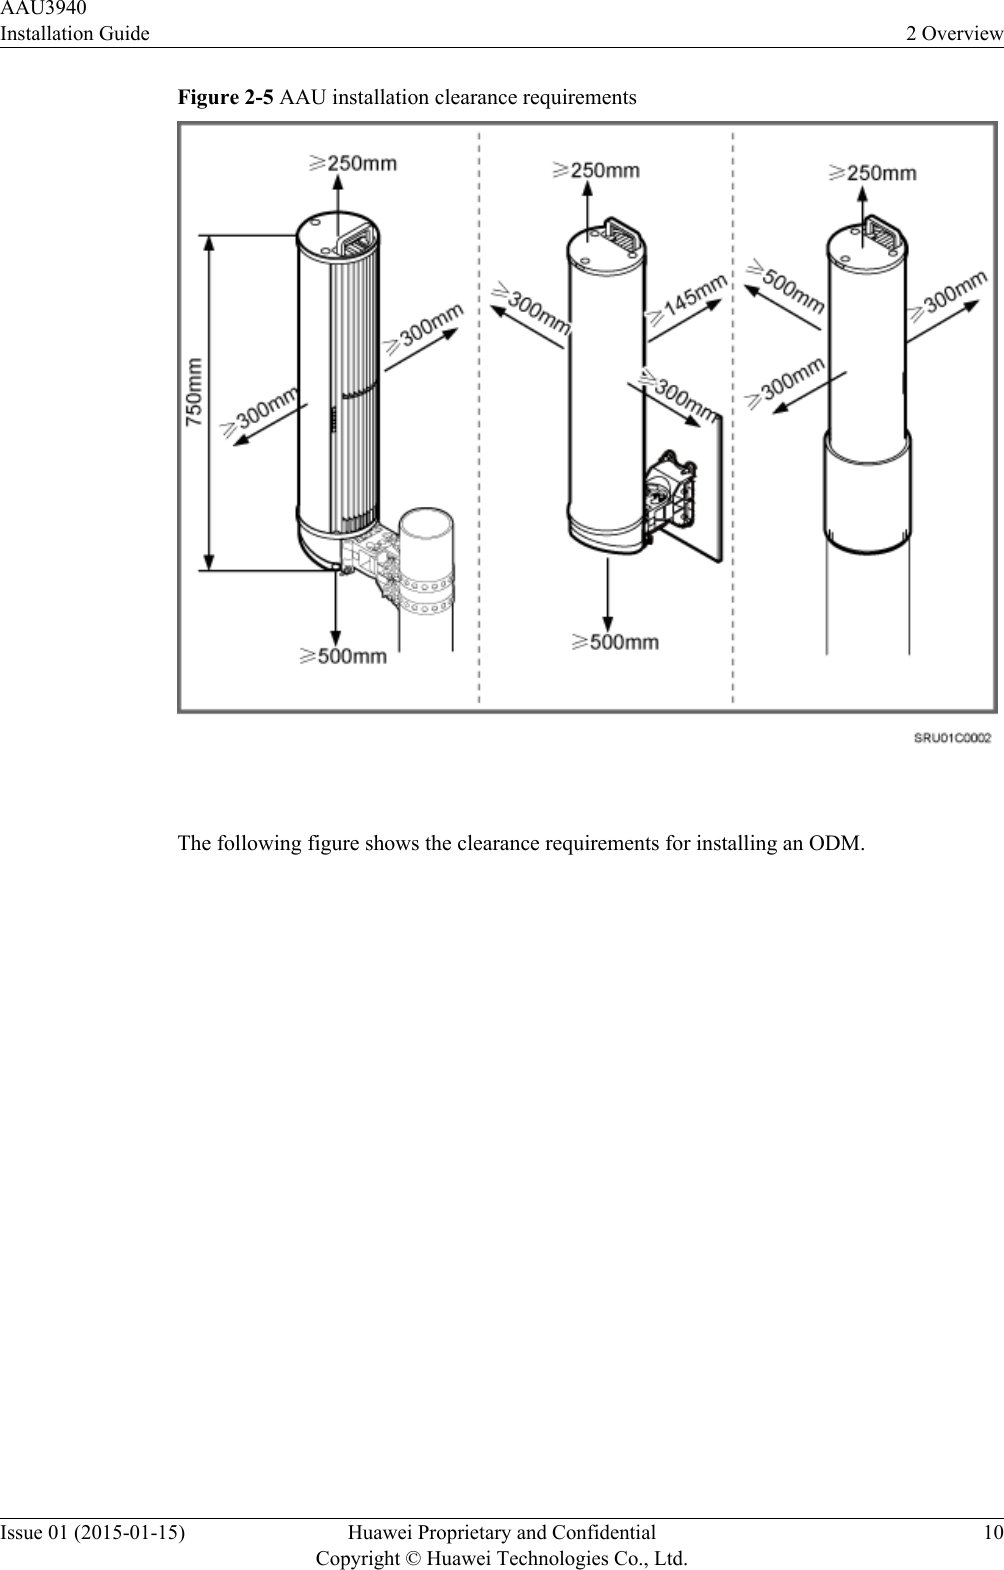 Figure 2-5 AAU installation clearance requirements The following figure shows the clearance requirements for installing an ODM.AAU3940Installation Guide 2 OverviewIssue 01 (2015-01-15) Huawei Proprietary and ConfidentialCopyright © Huawei Technologies Co., Ltd.10